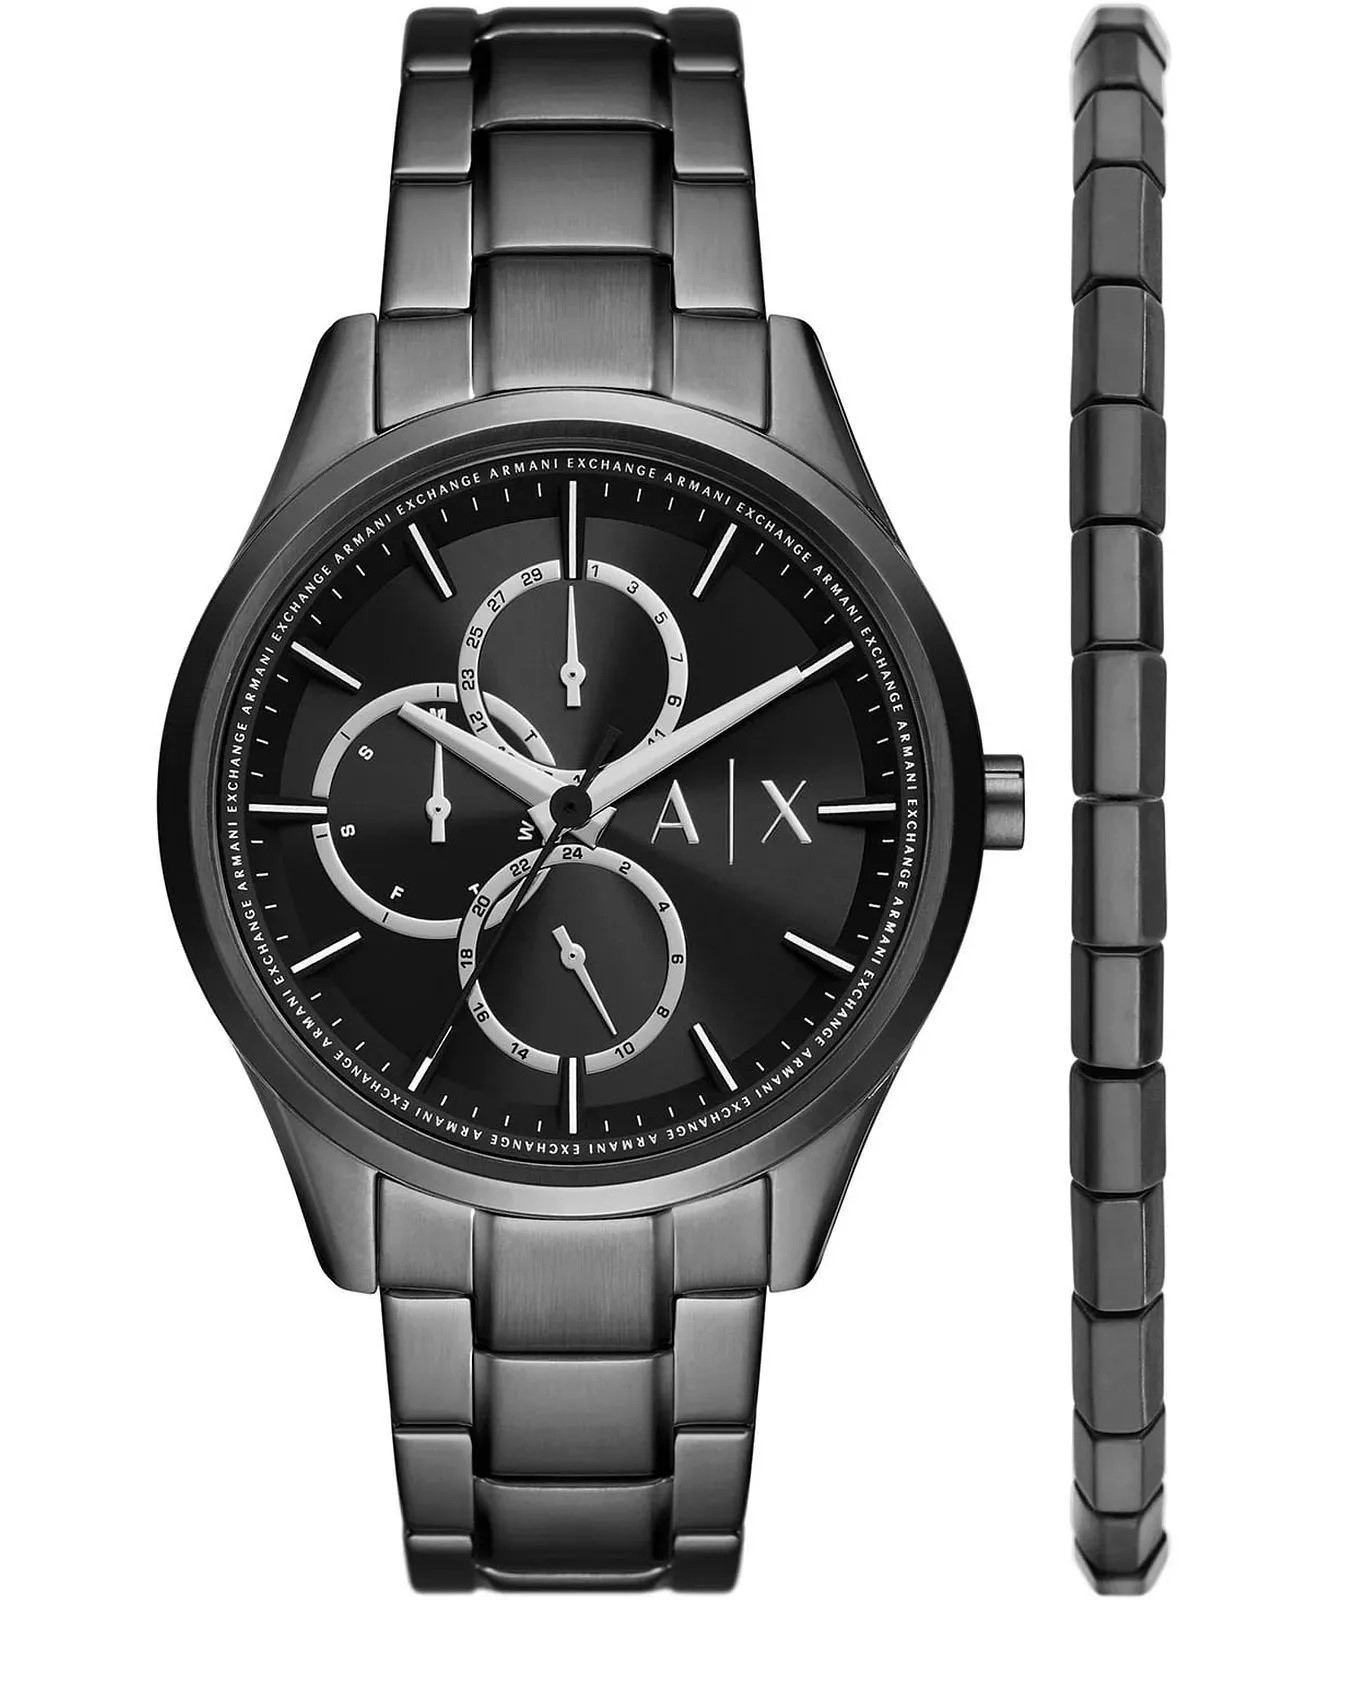 armani exchange dante mens gift set ax7154 black case with stainless steel bracelet image1